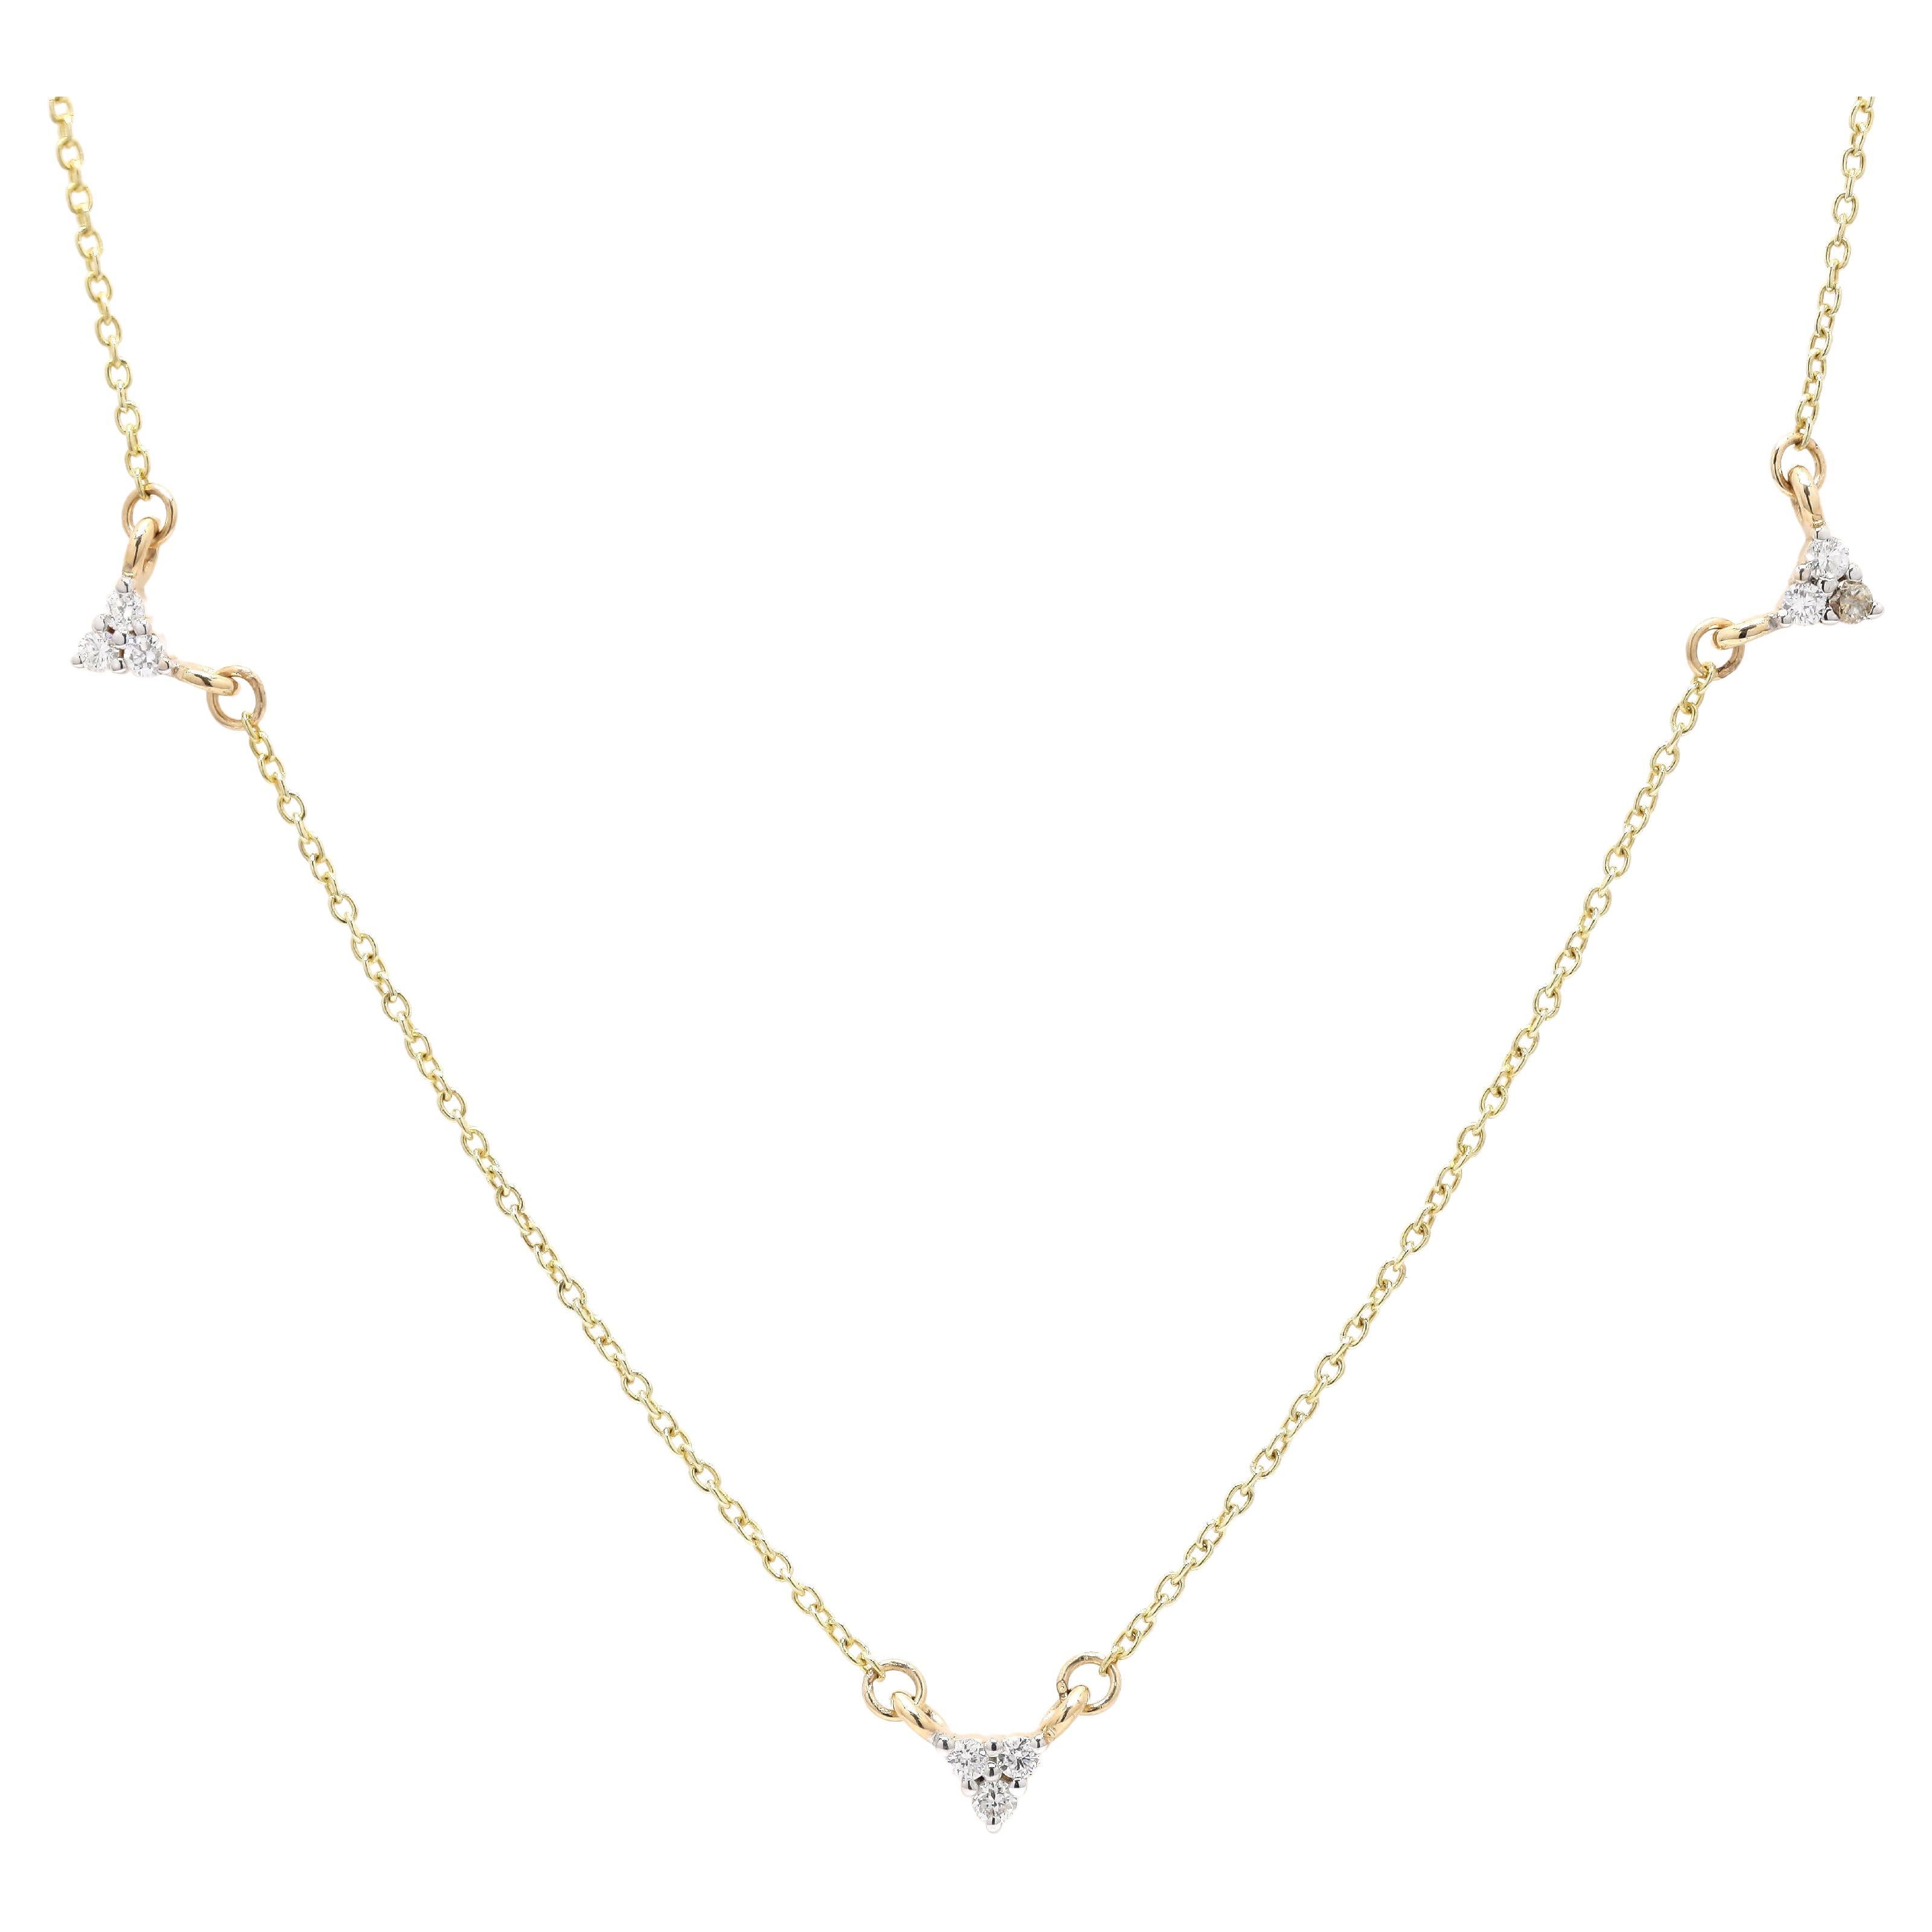 Minimalist Diamond Chain Necklace in 14K Yellow Gold For Sale